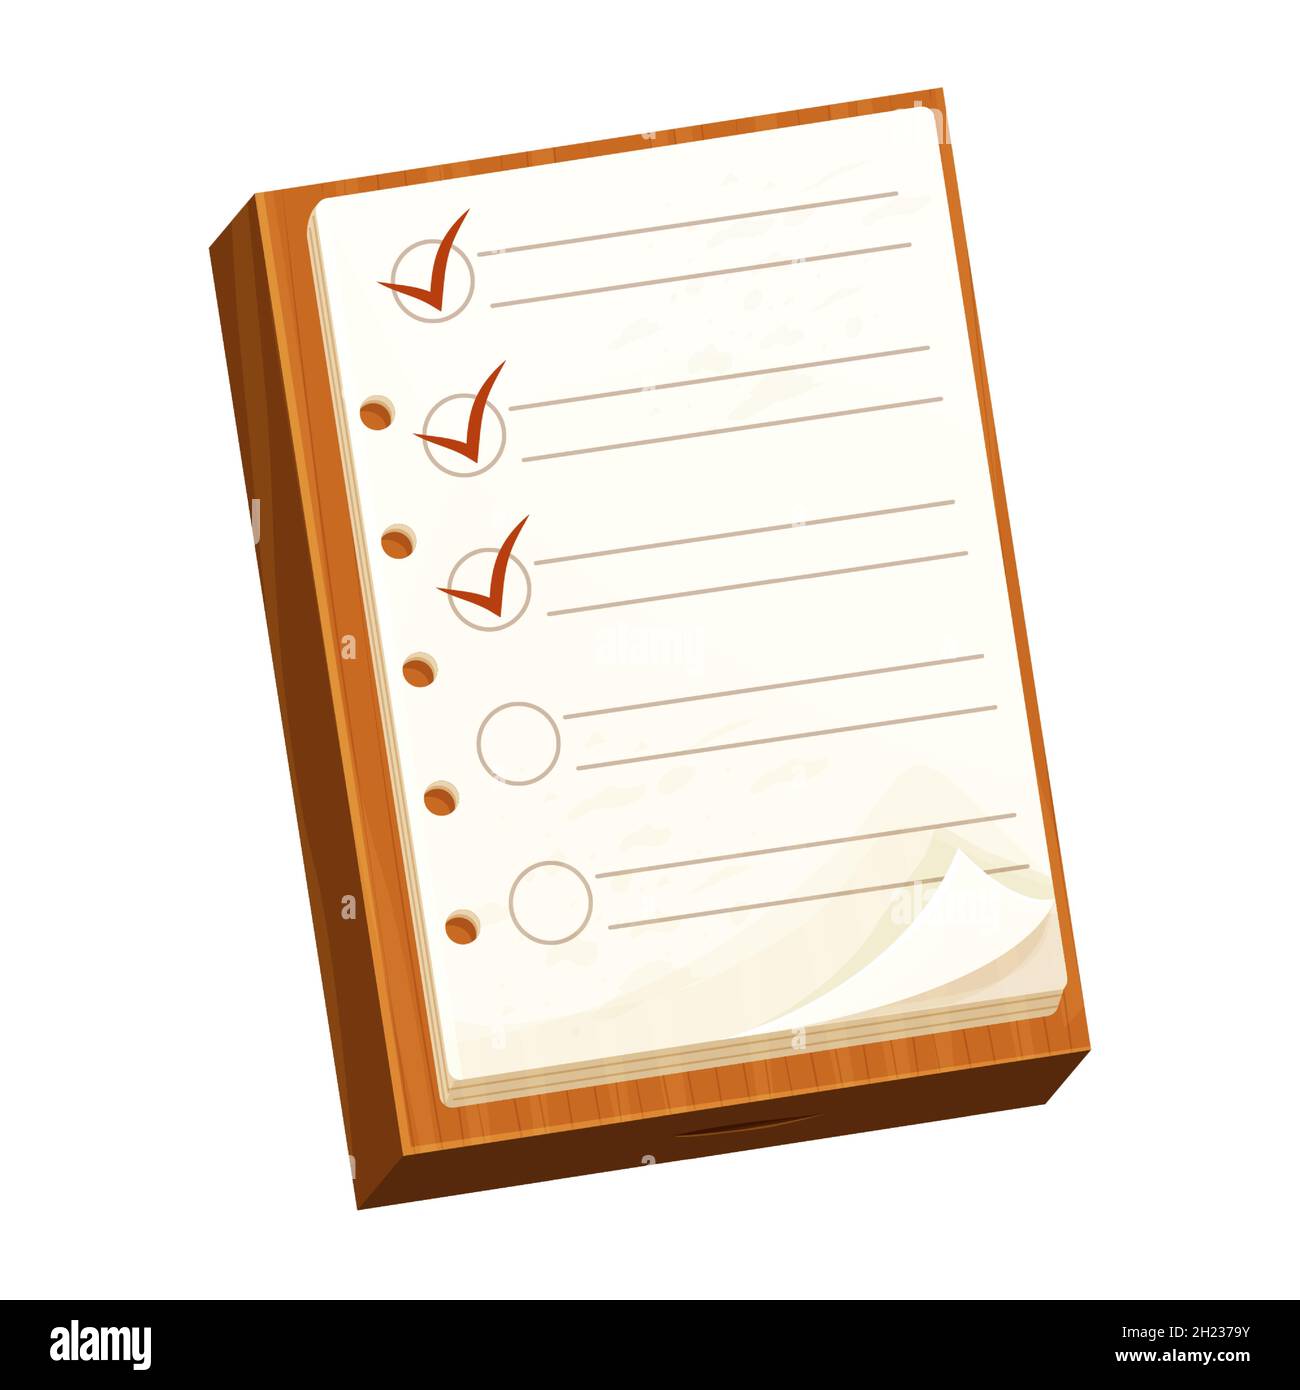 https://c8.alamy.com/comp/2H2379Y/checklist-on-a-wooden-board-note-paper-to-do-work-in-cartoon-style-isolated-on-white-background-successful-completion-tasks-retro-vintage-vector-illustration-2H2379Y.jpg